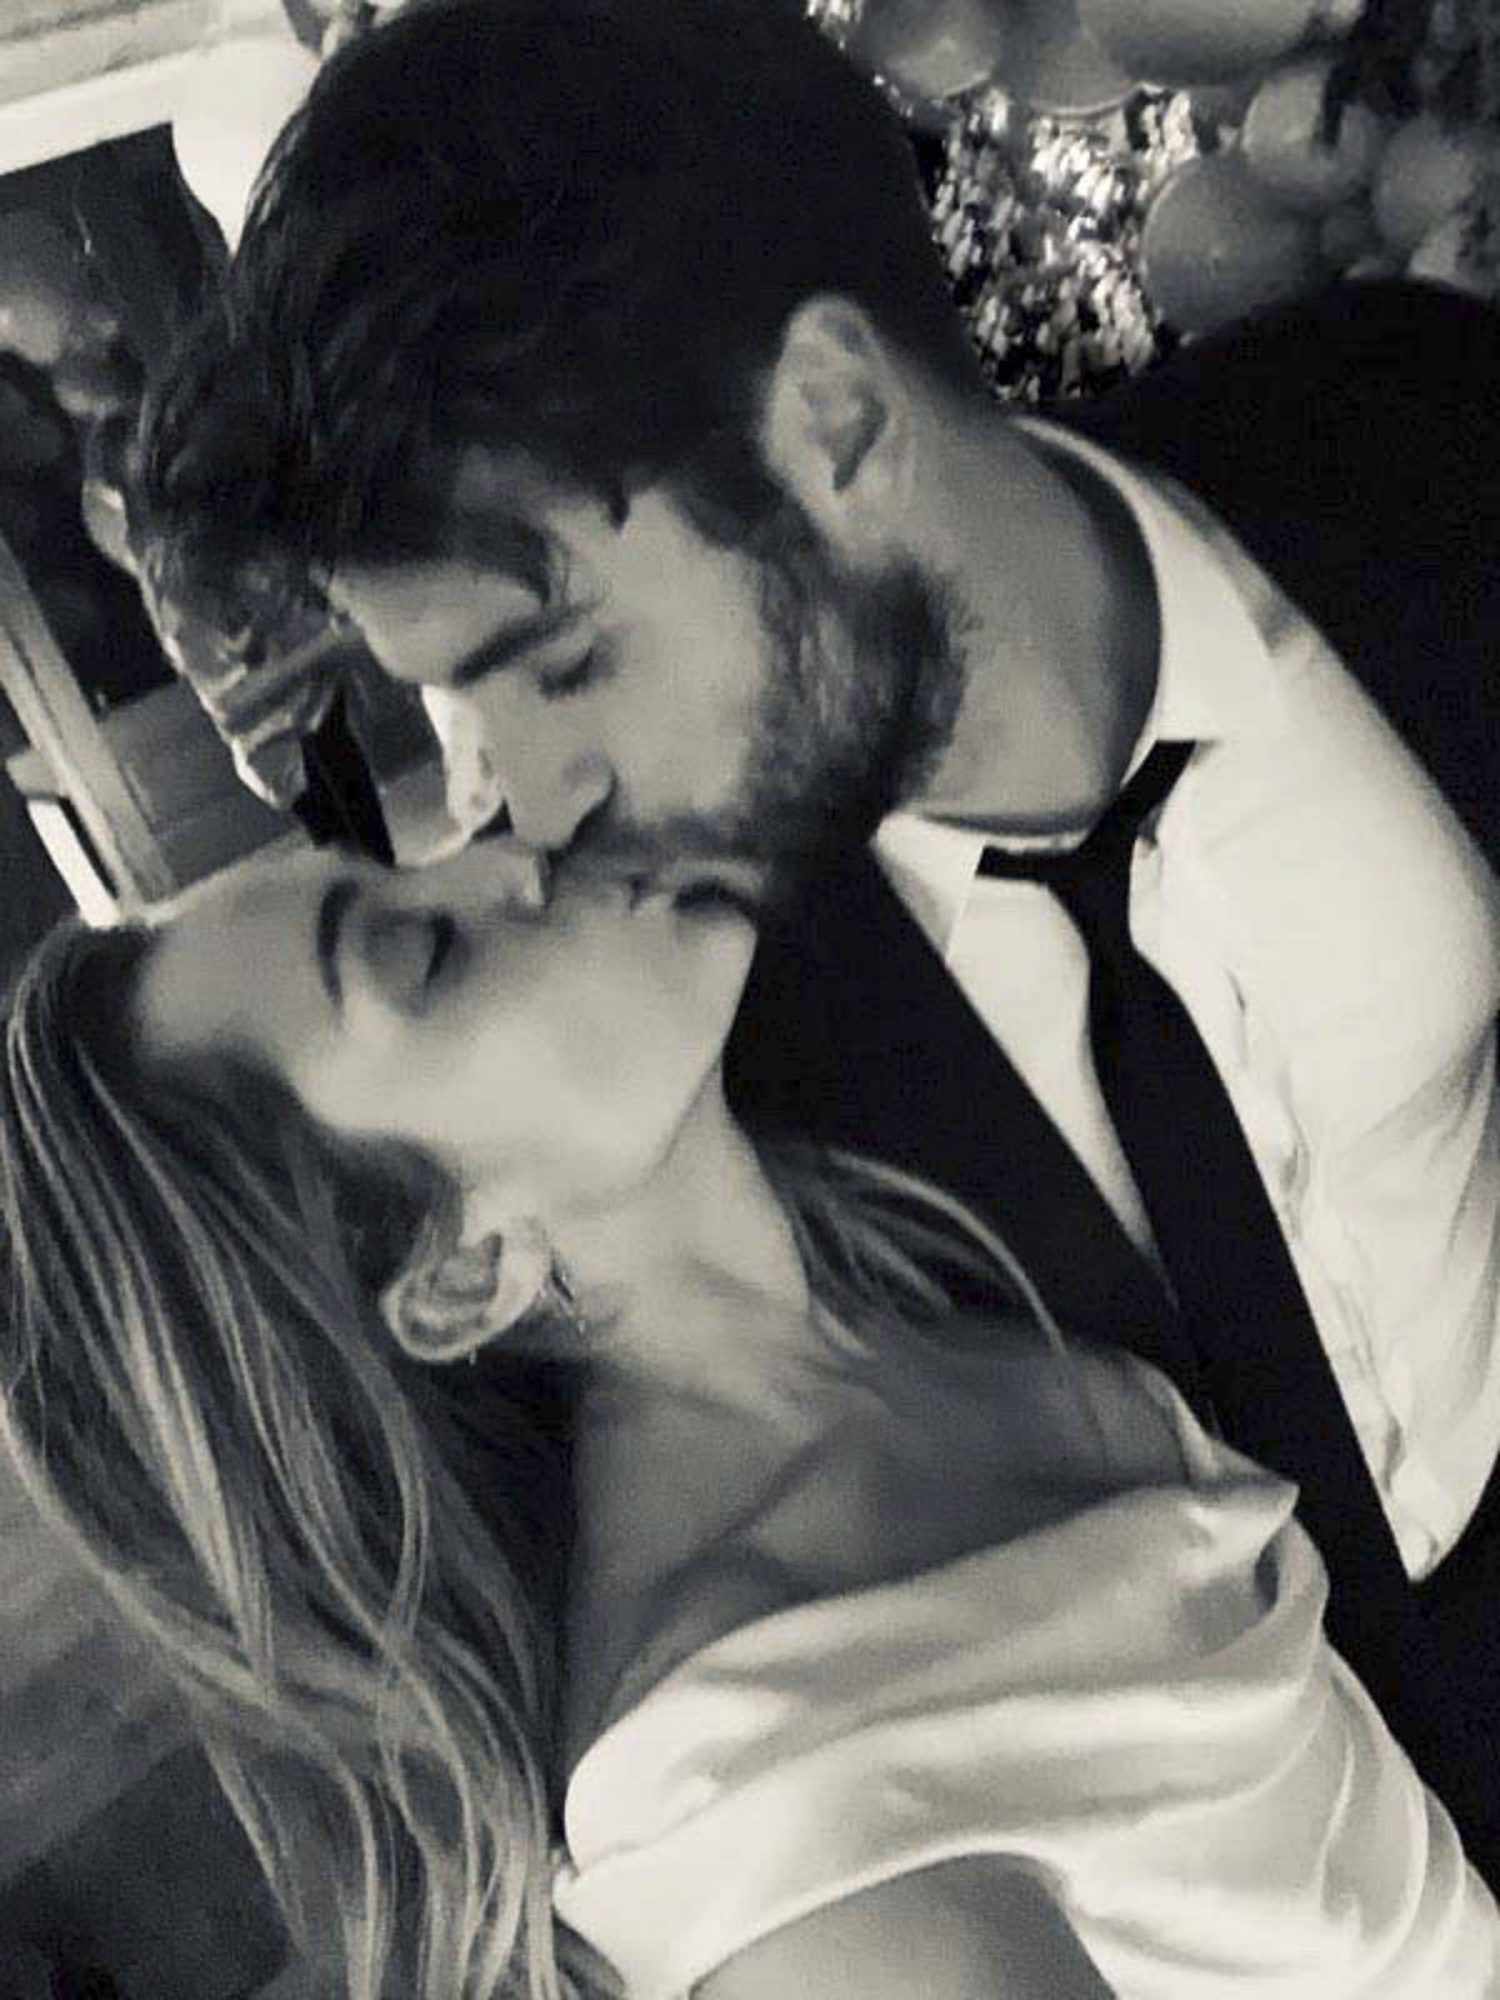 Why Miley Cyrus and Liam Hemsworth's Marriage Ended Will Shock You - Find Out Now! 11